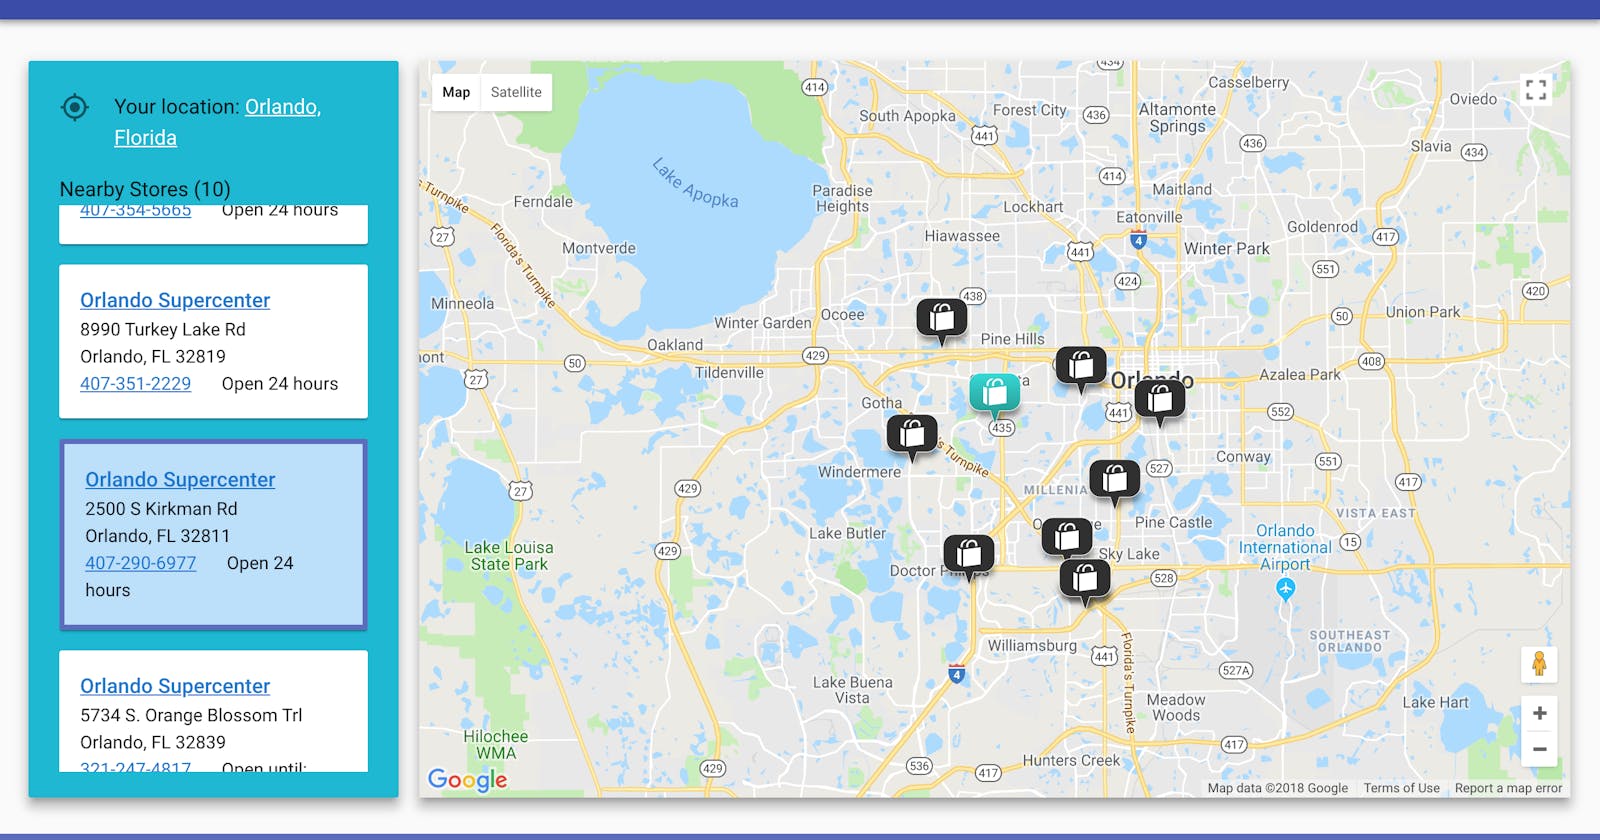 How to create a store locator app using Vuejs, Cosmic JS, and Google Maps.